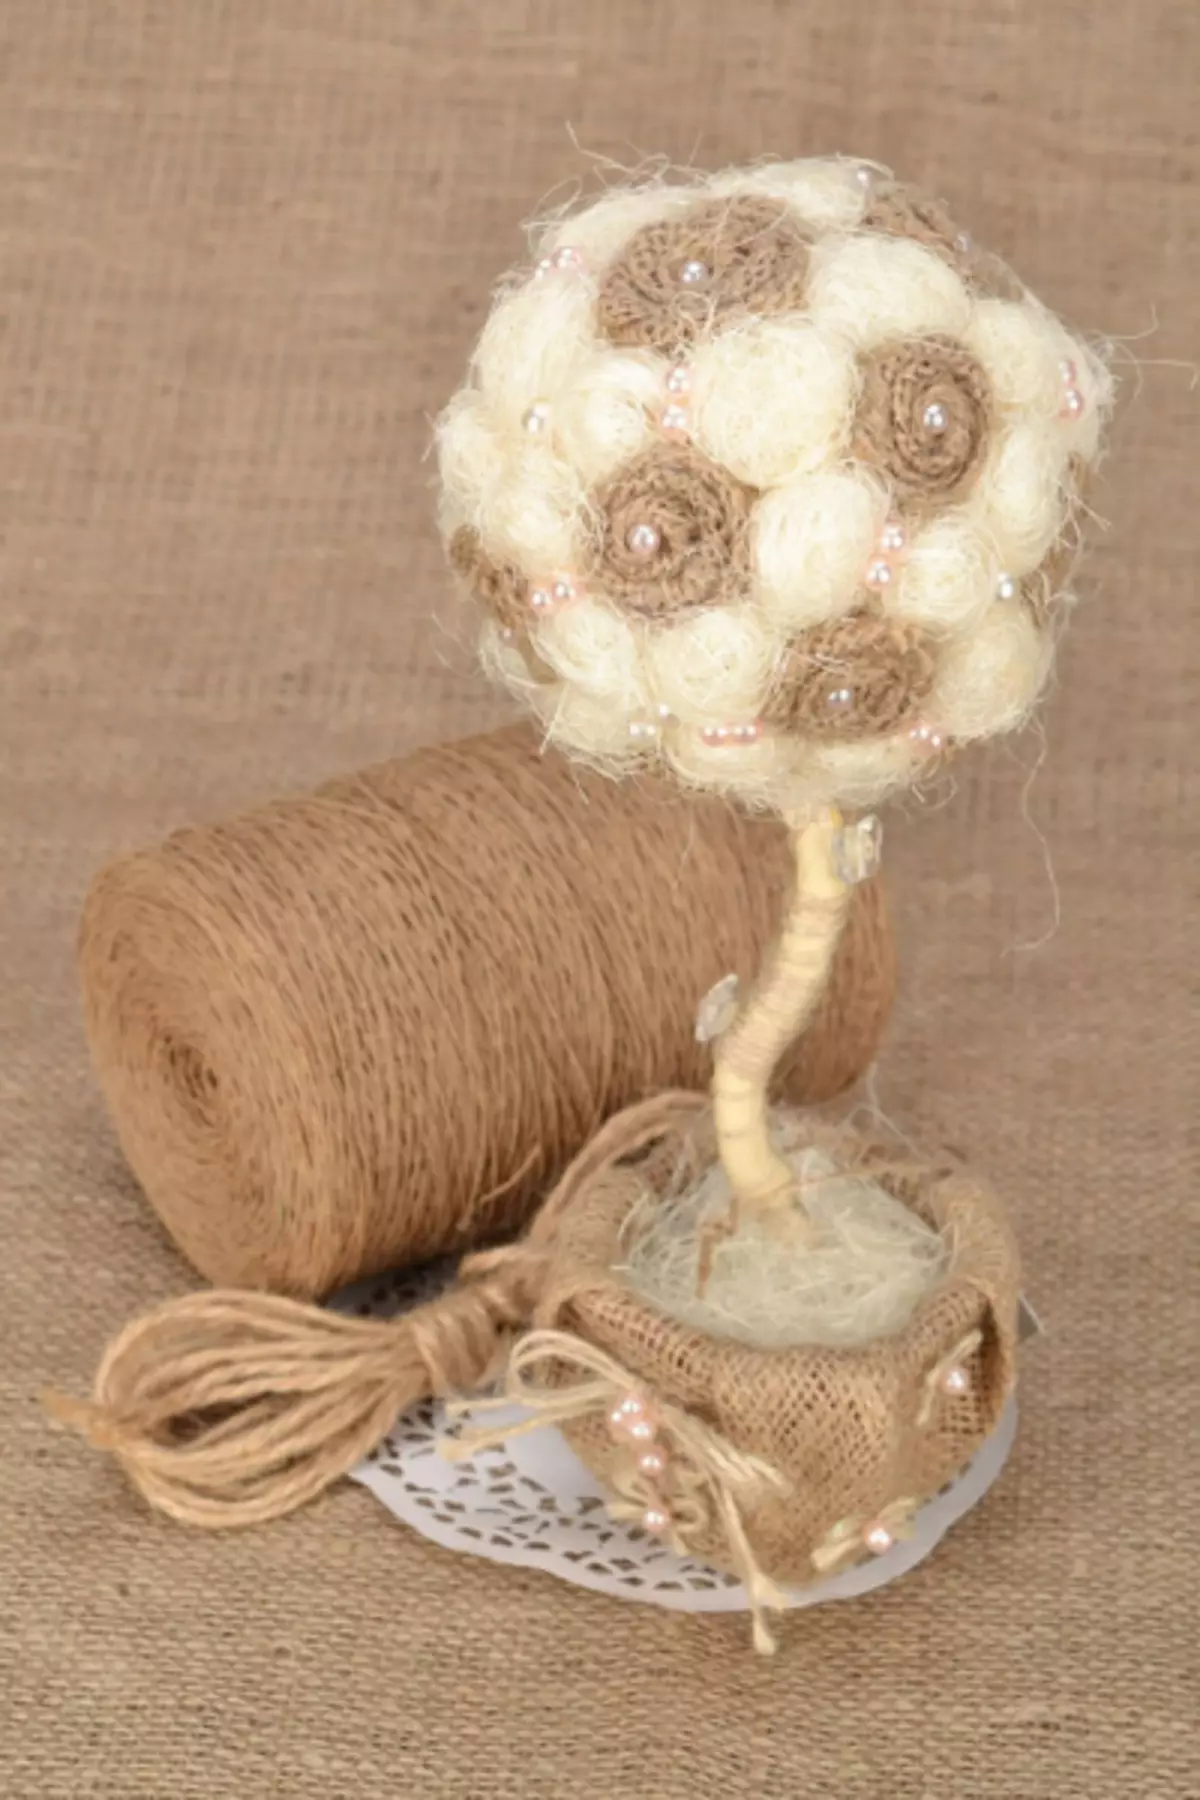 What can make a ball for Topiaria and for decoration